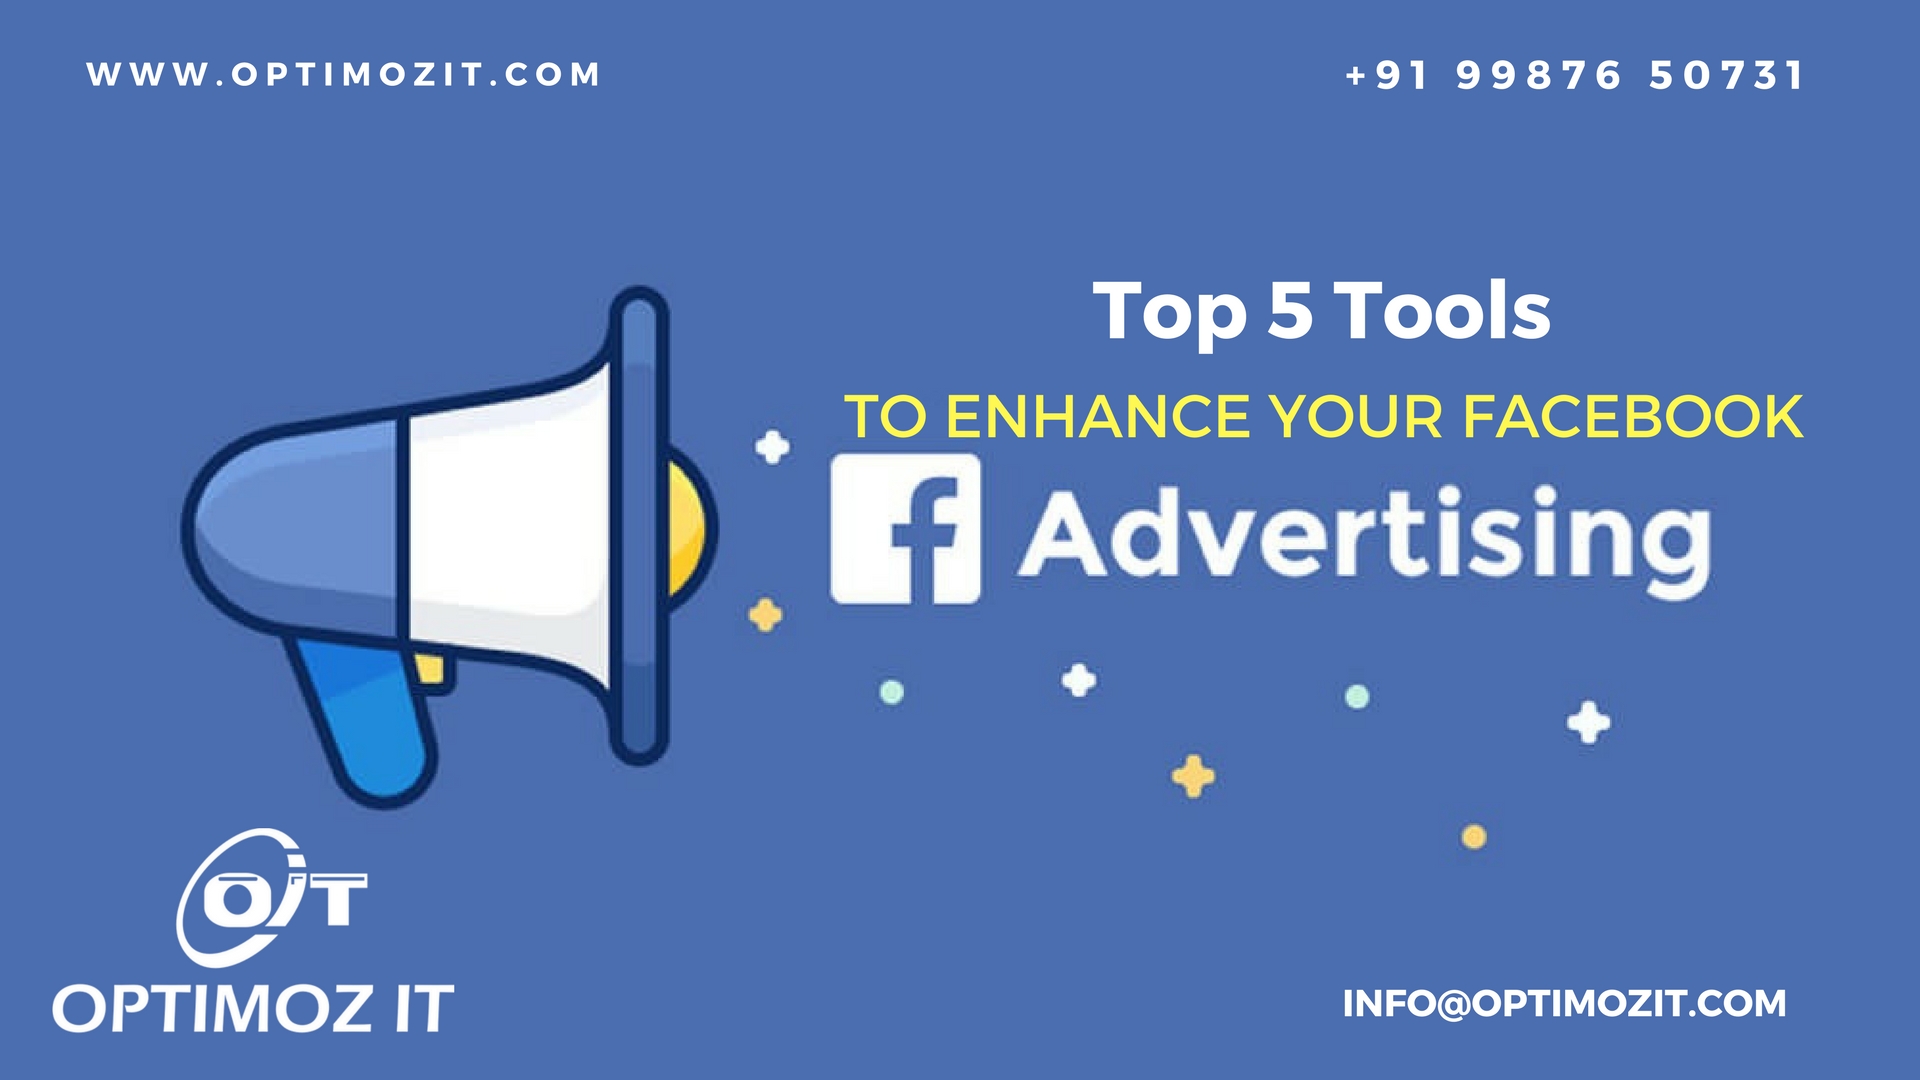 Top 5 Tools to Enhance Your Facebook Ads